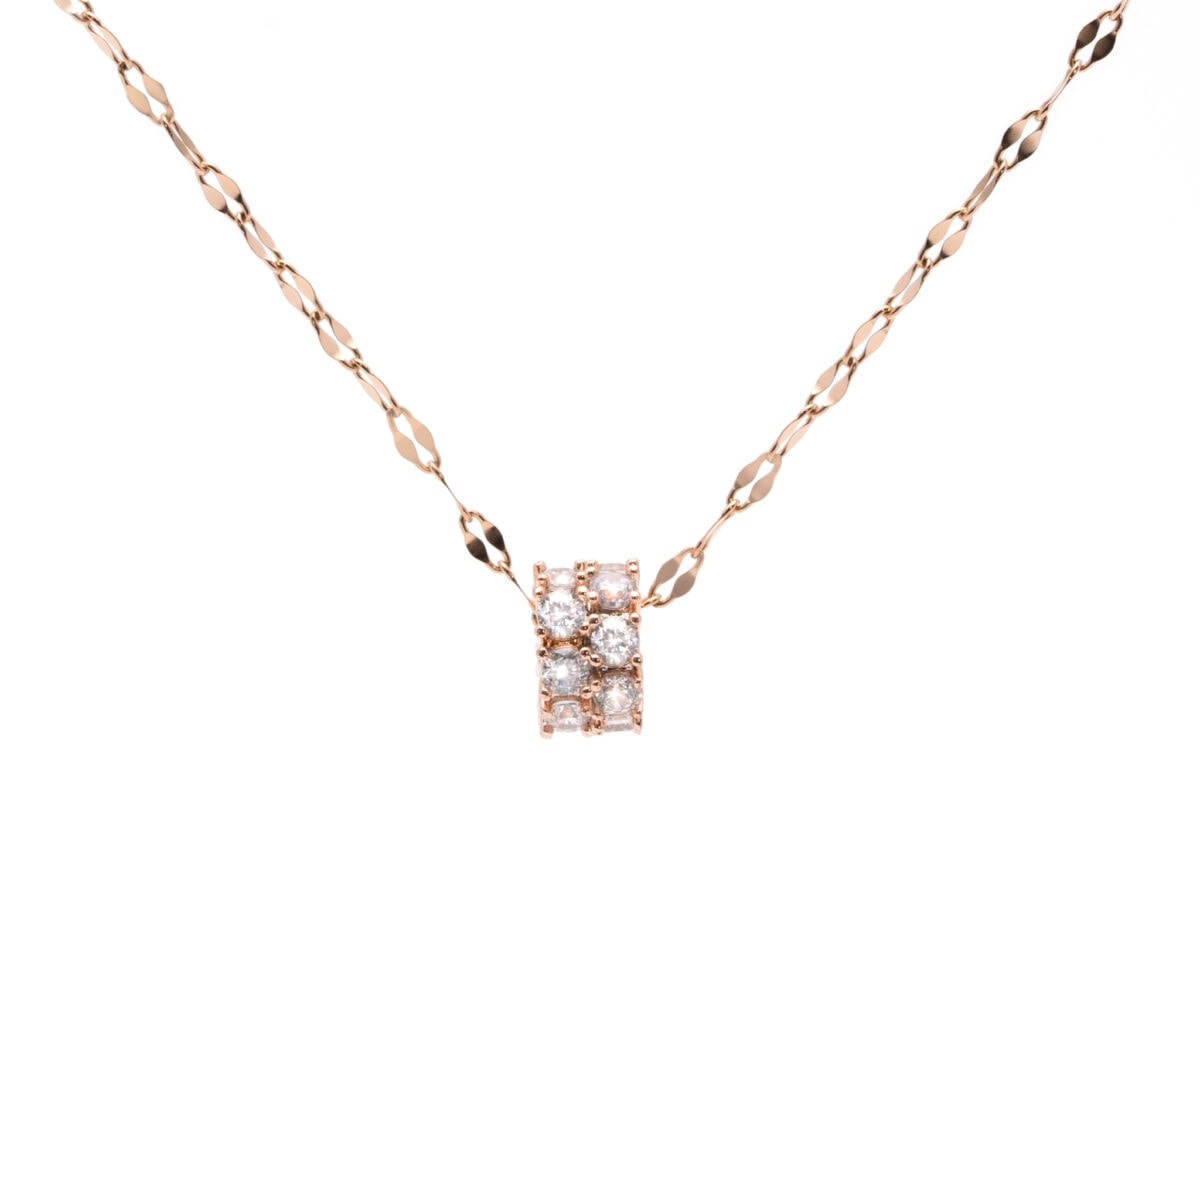 https://m.clubbella.co/product/turin/ Turin Necklace (2)